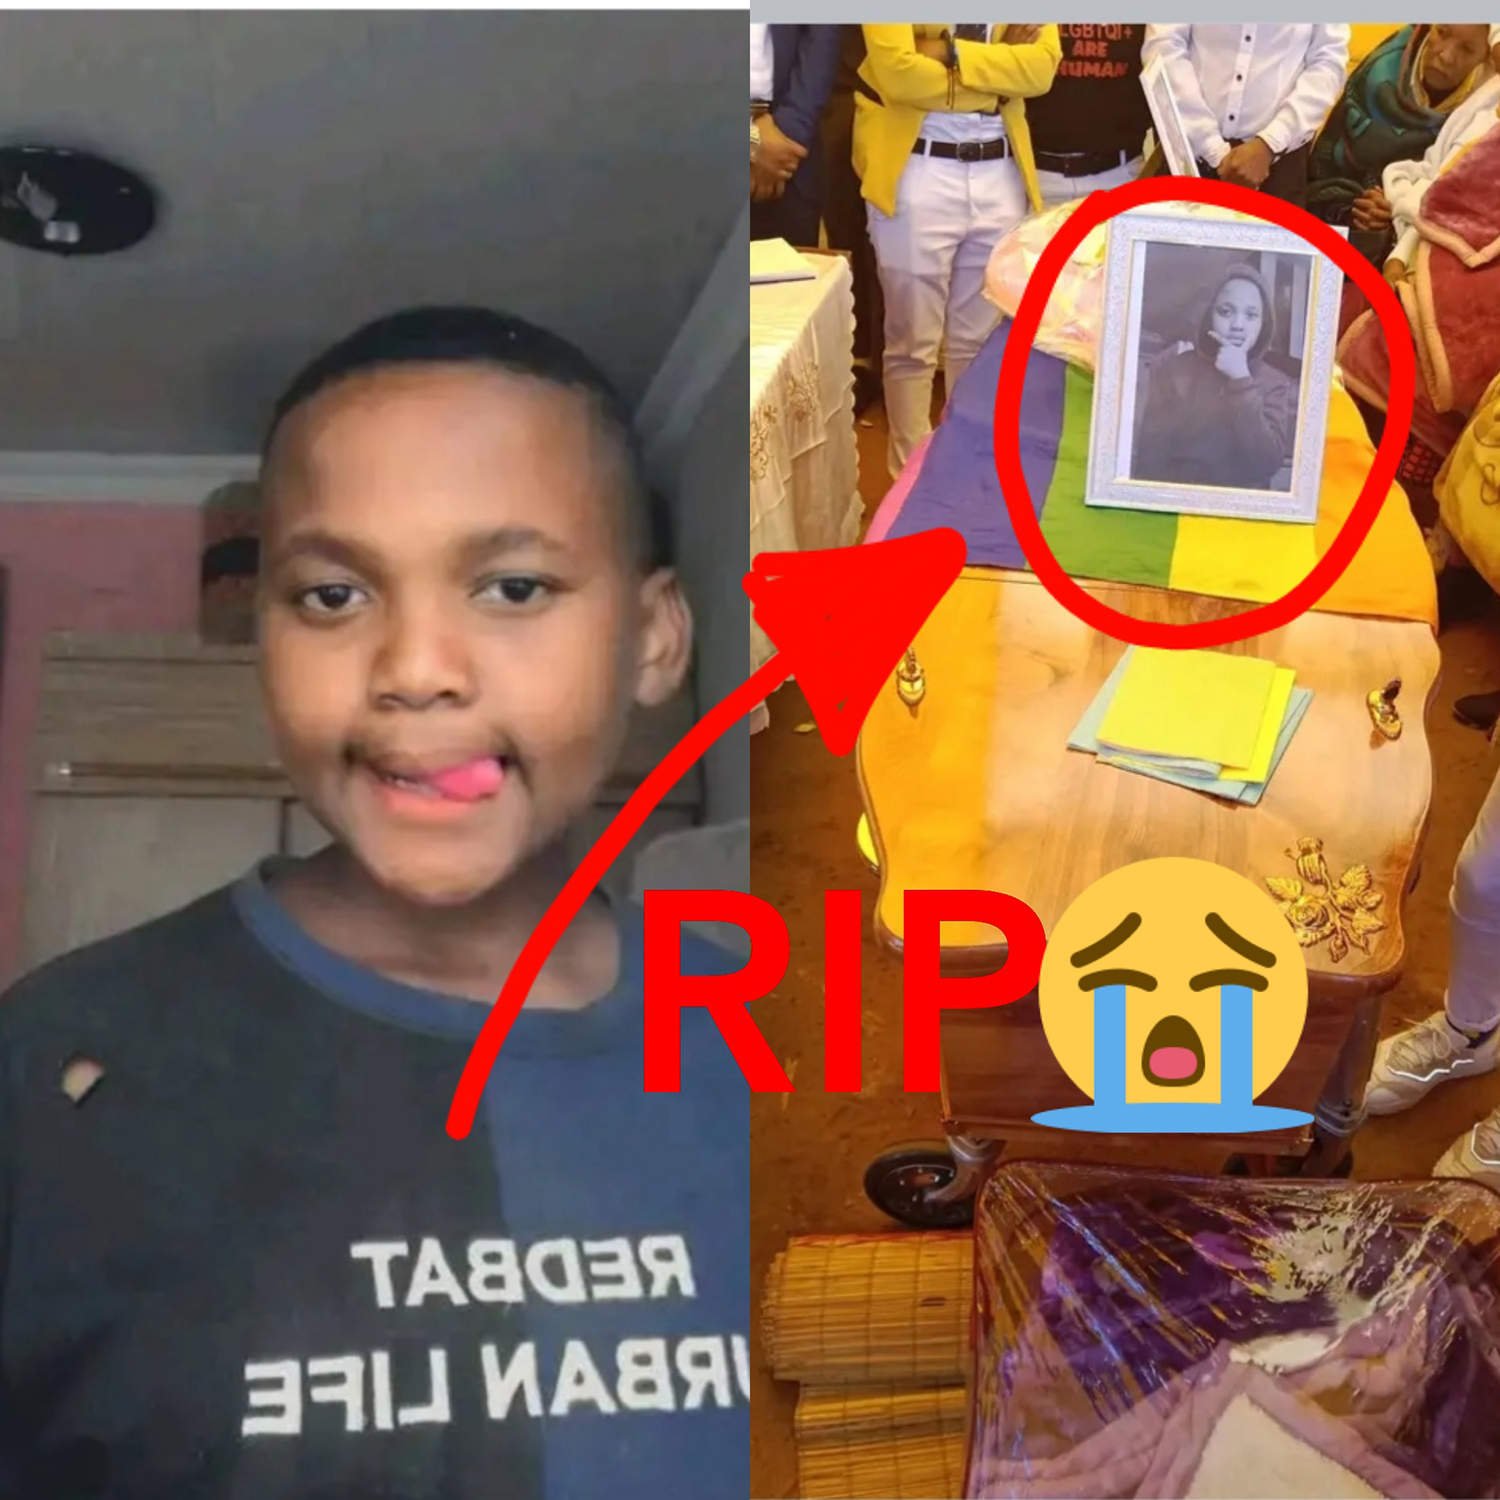 14 Years Old Boy Killed Himself And Left This Painful Message That Left People In Tears, RIP 1